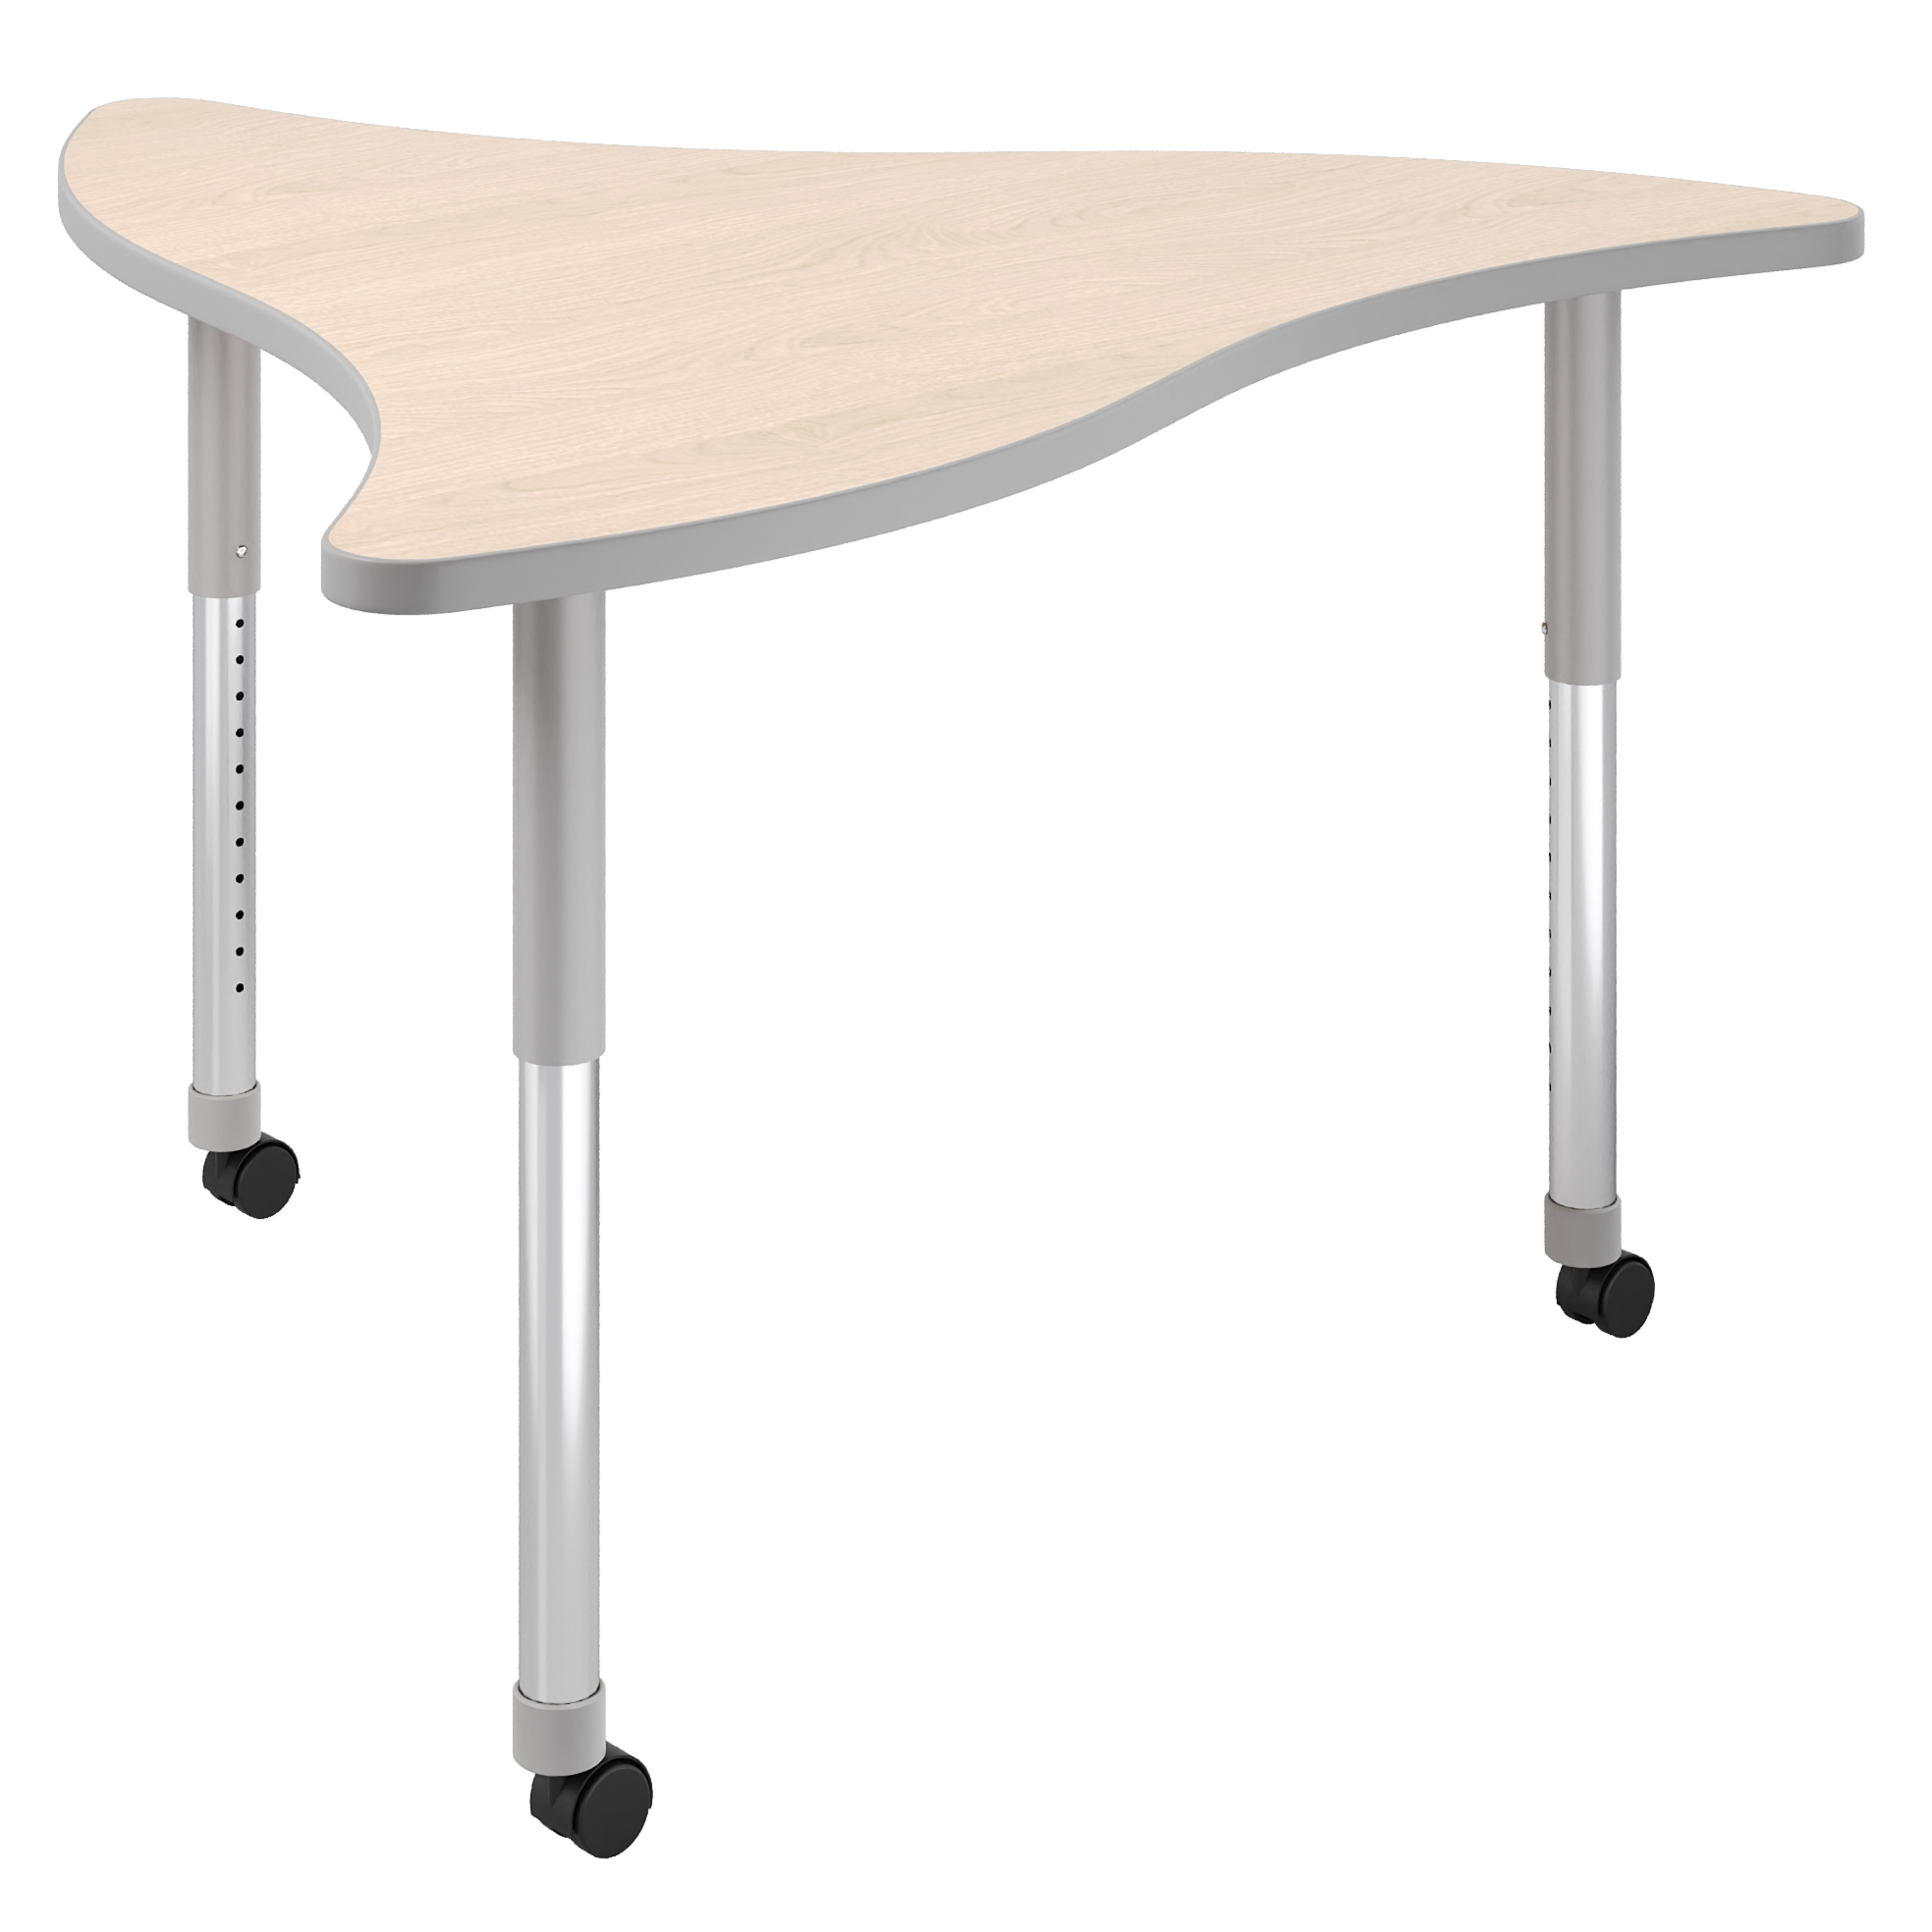 Adjustable Legs for Shape Tables – Artcobell